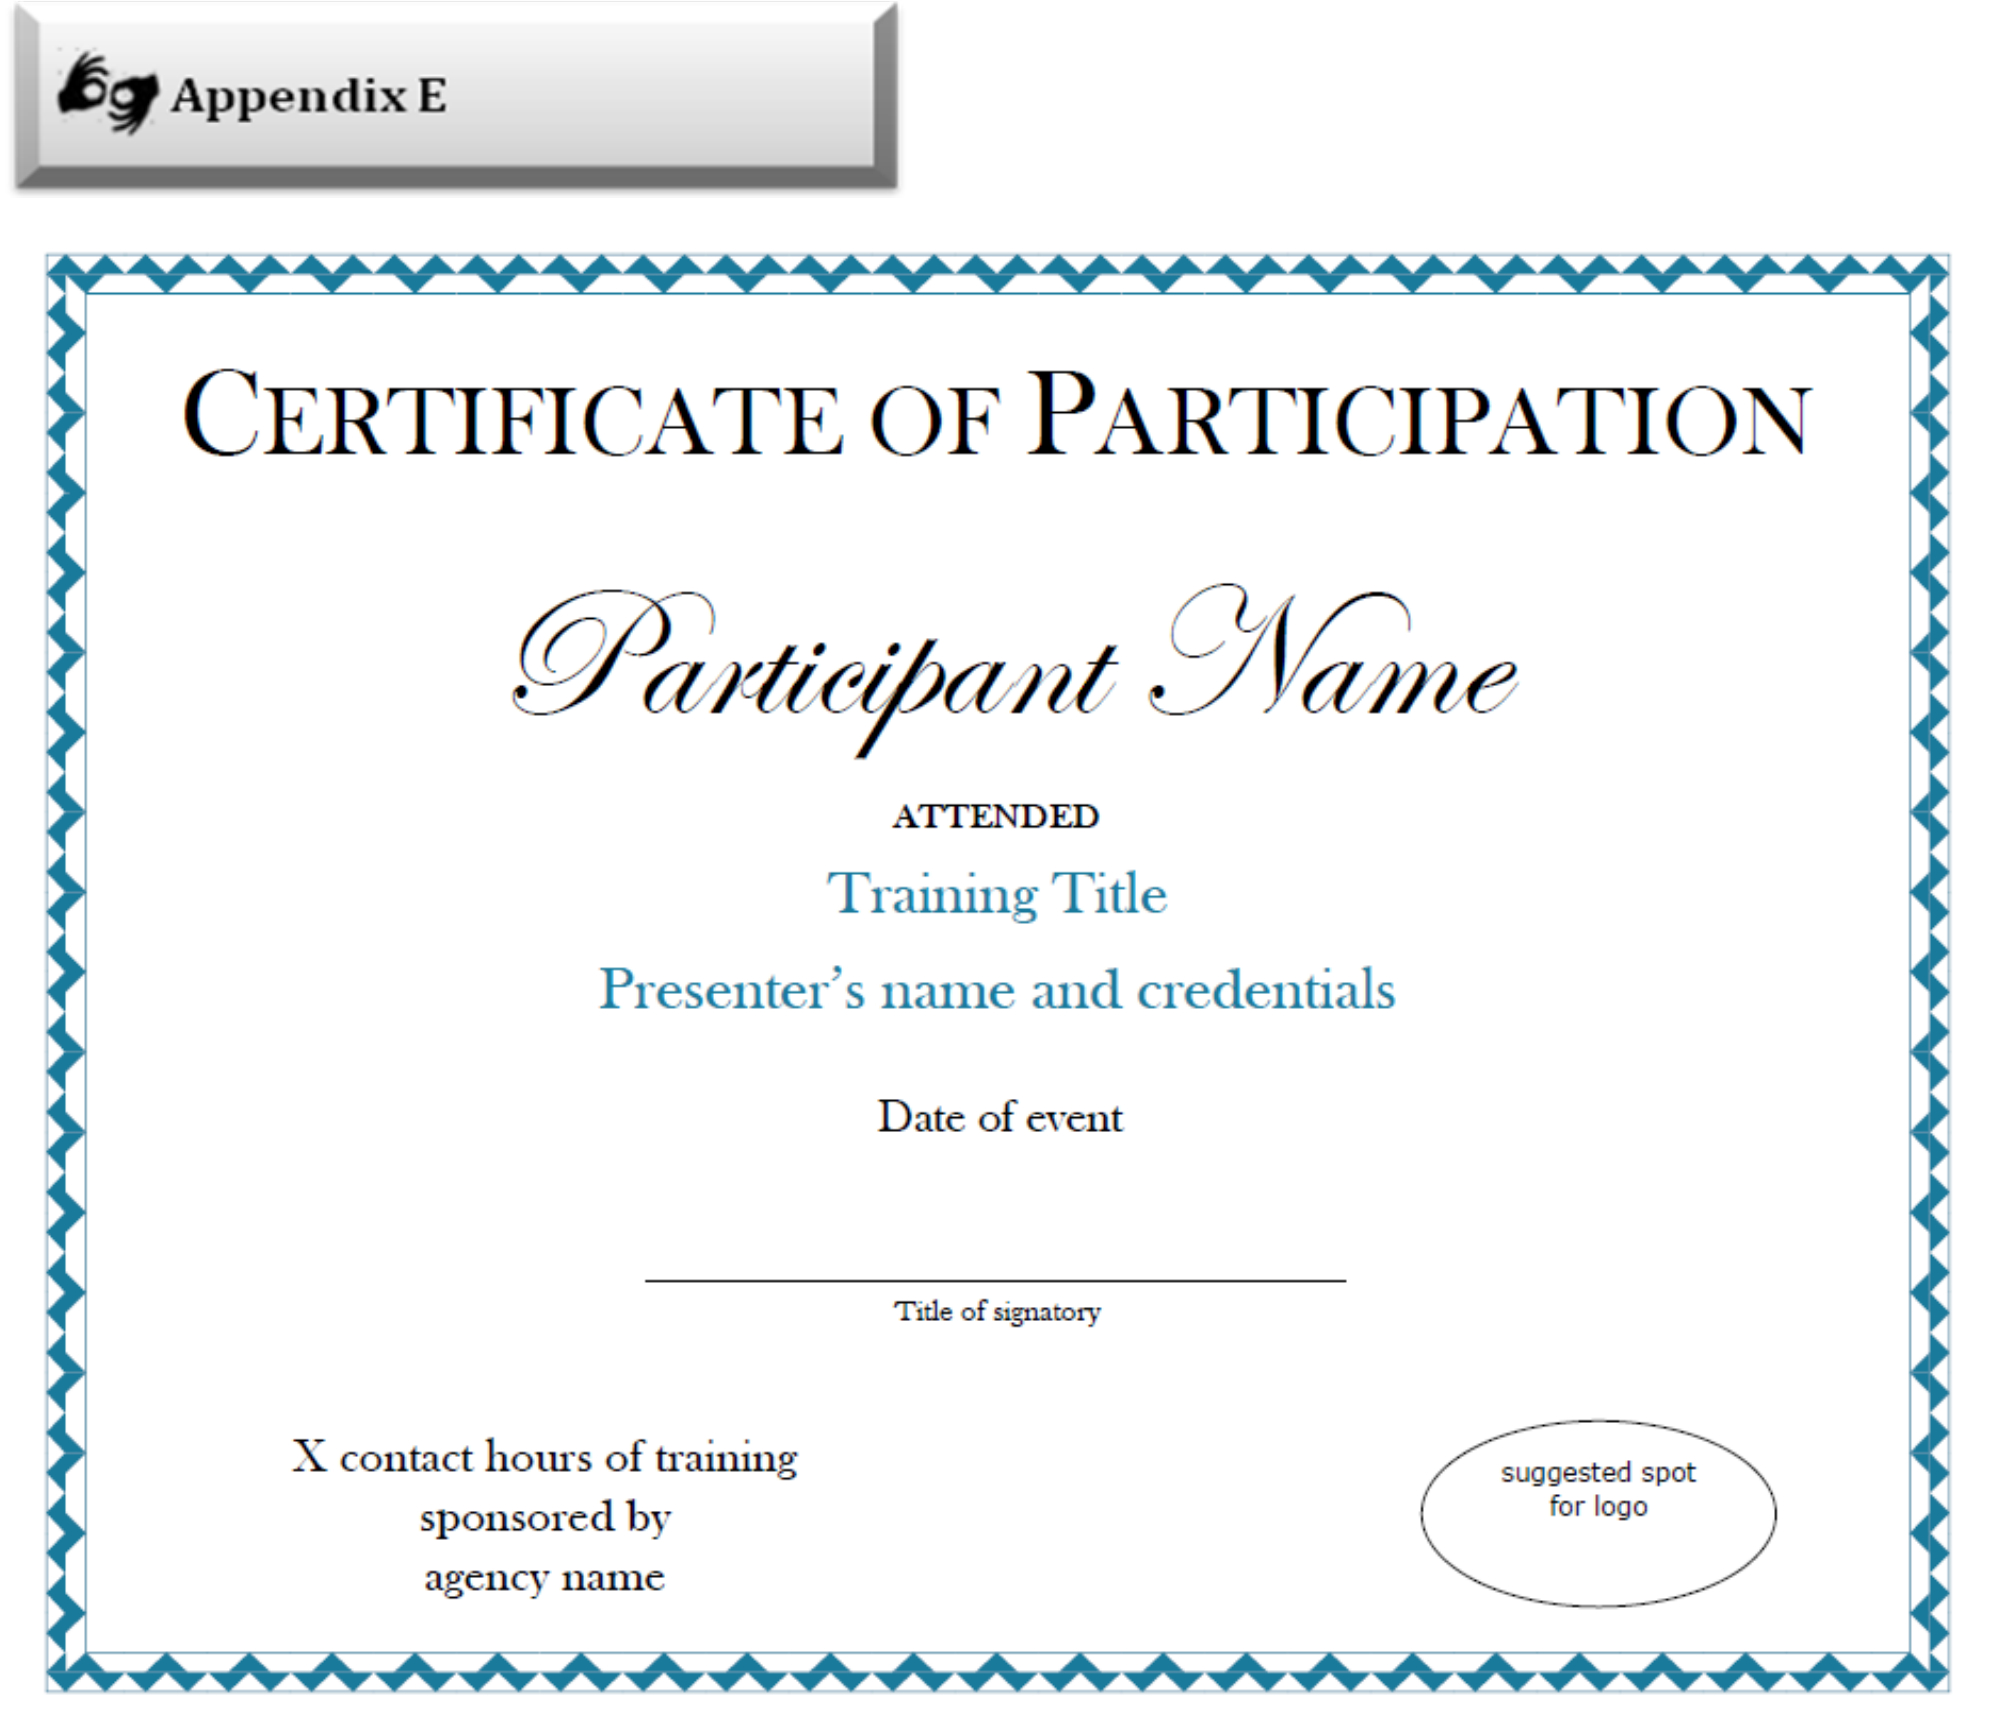 Certificate Of Participation Sample Free Download Throughout Certificate Of Participation In Workshop Template